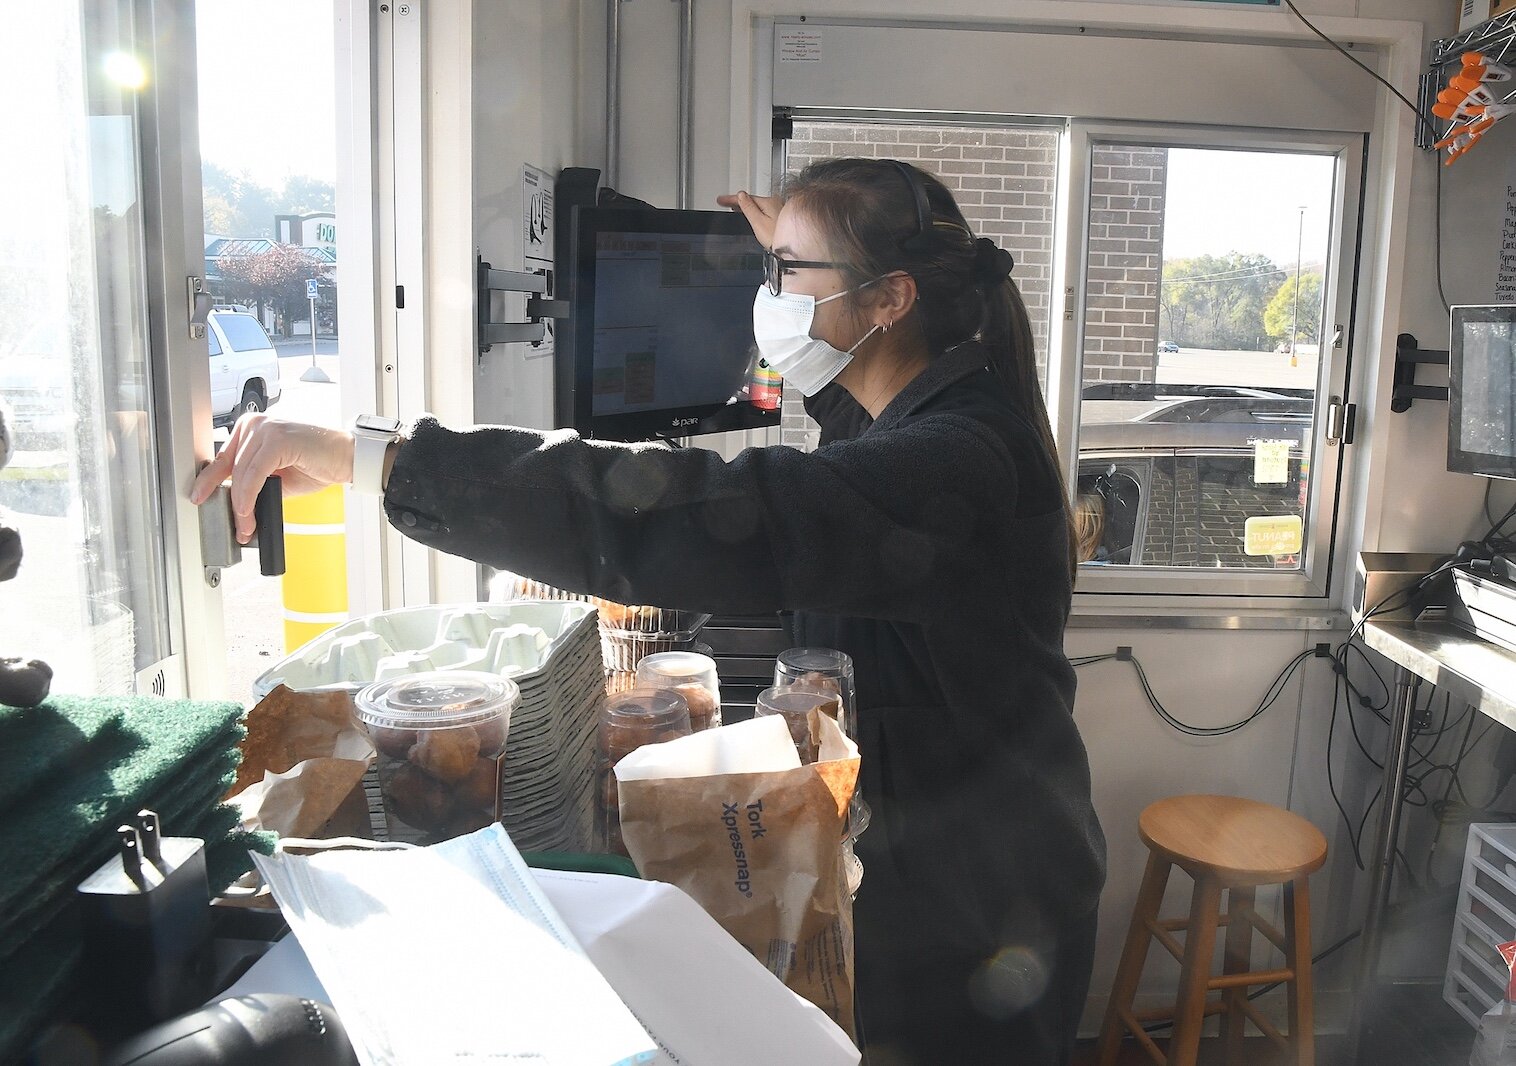 Morgan Gonoe staffs the windows at the newly open drive-up Biggby Coffee shop on West Michigan Avenue in Urbandale.